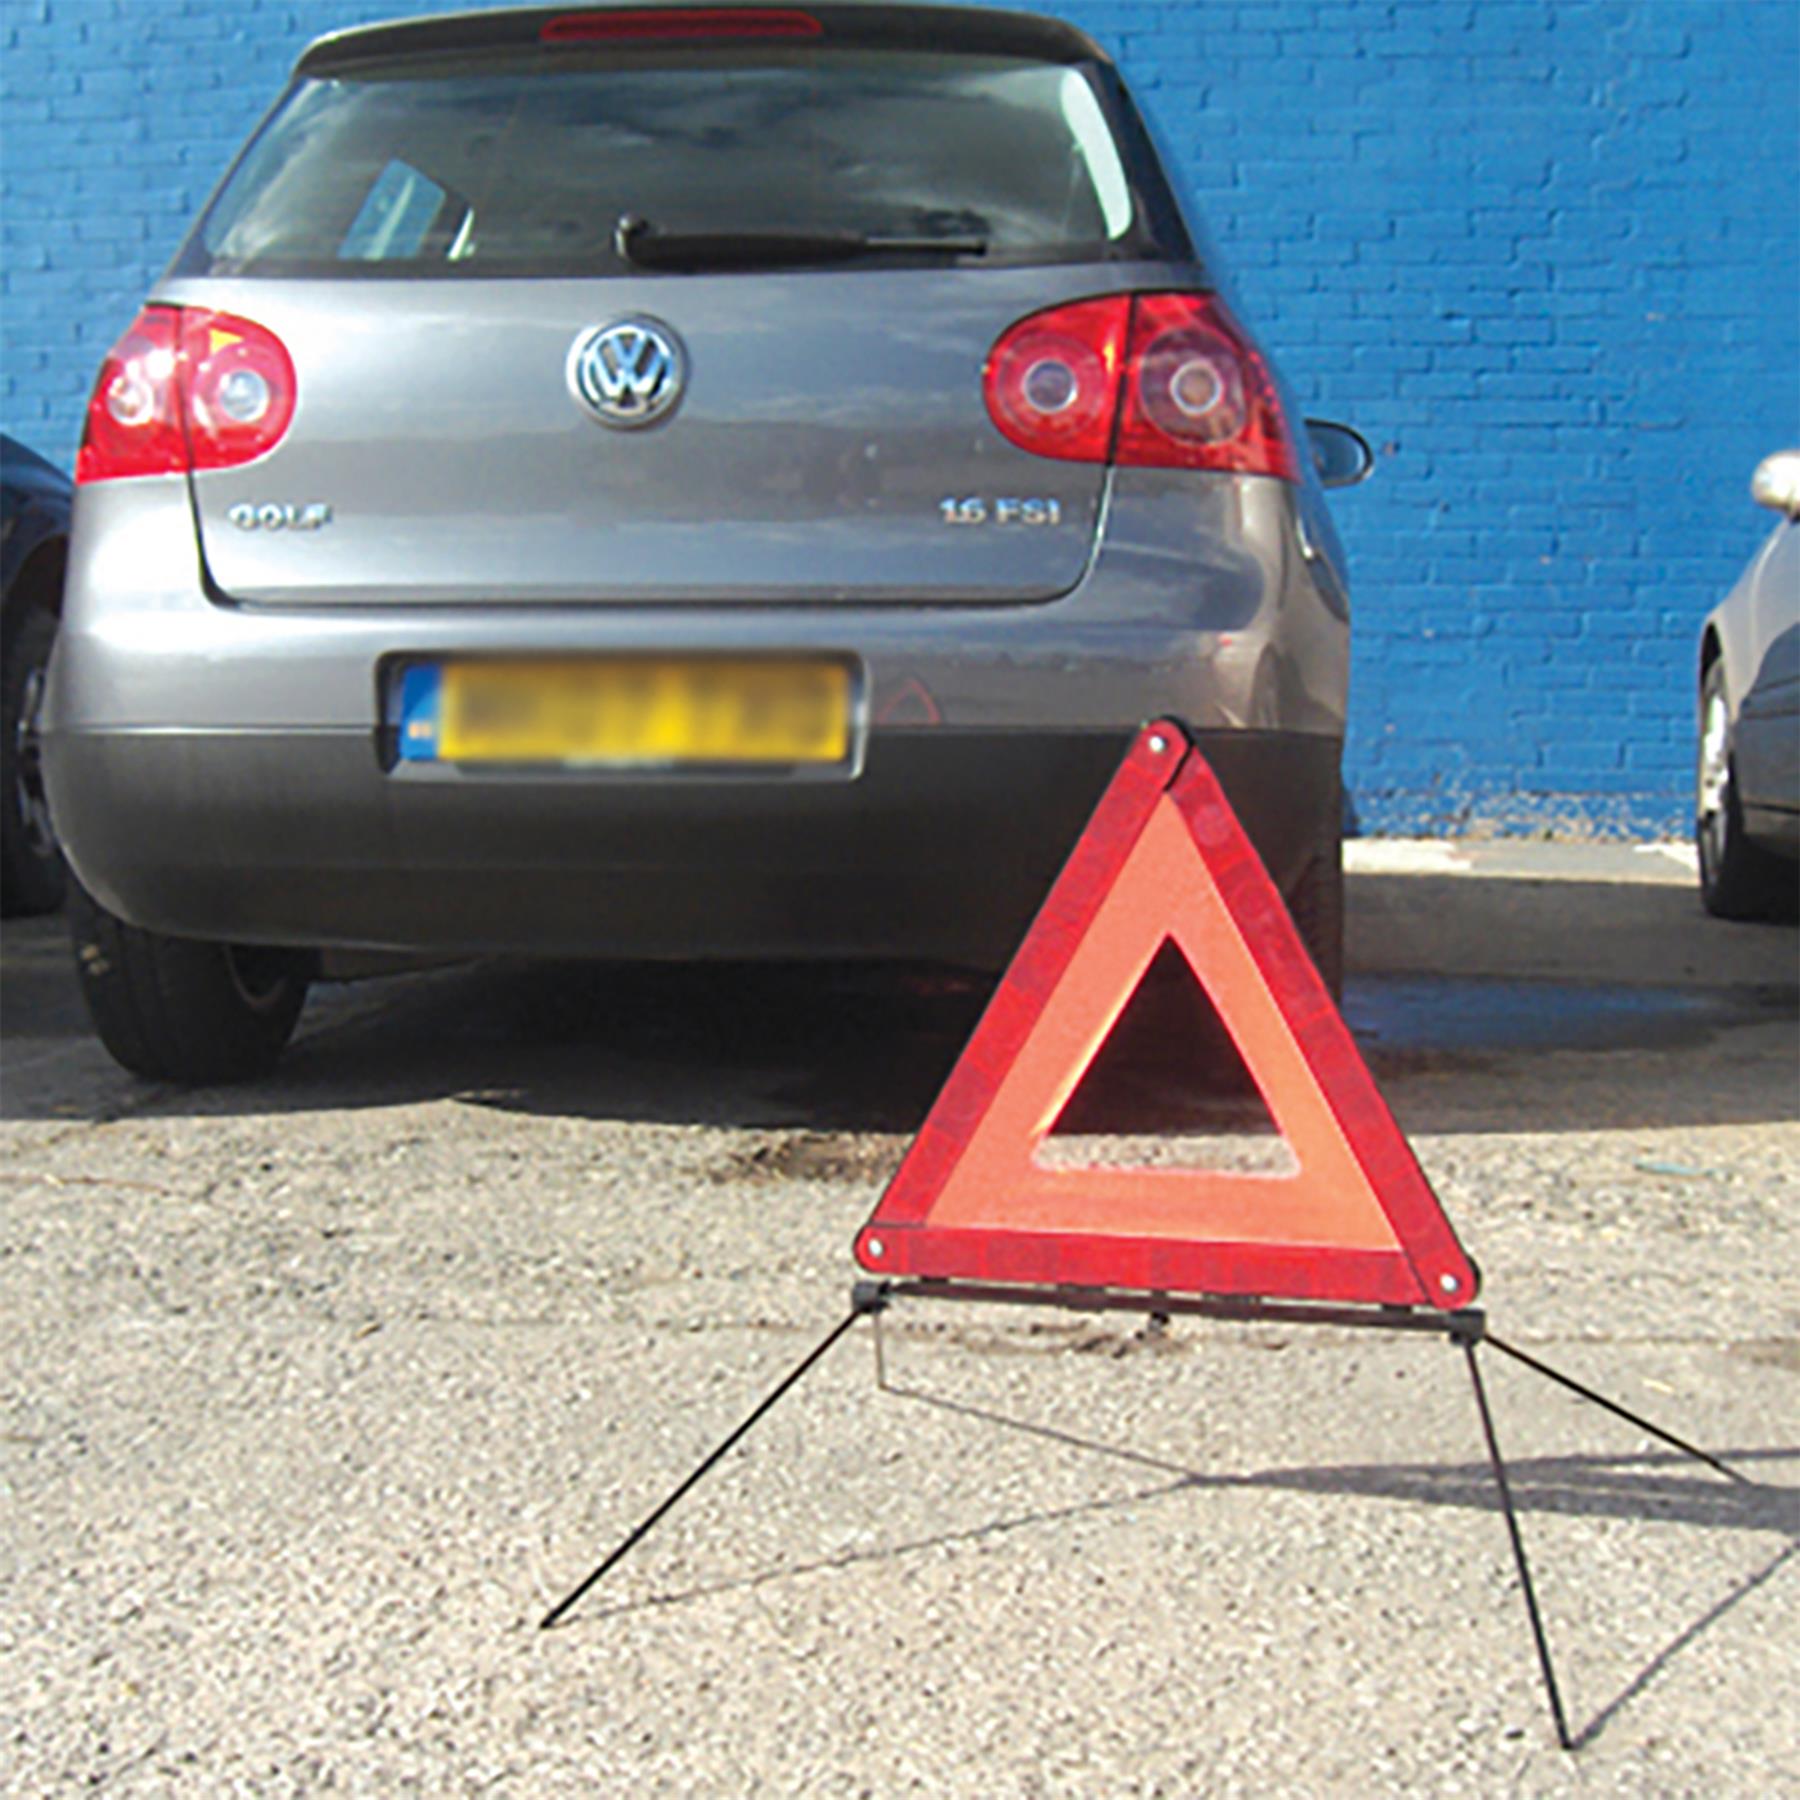 Reflective Road Safety Folding Triangle - Conforms To European Standard Ece27